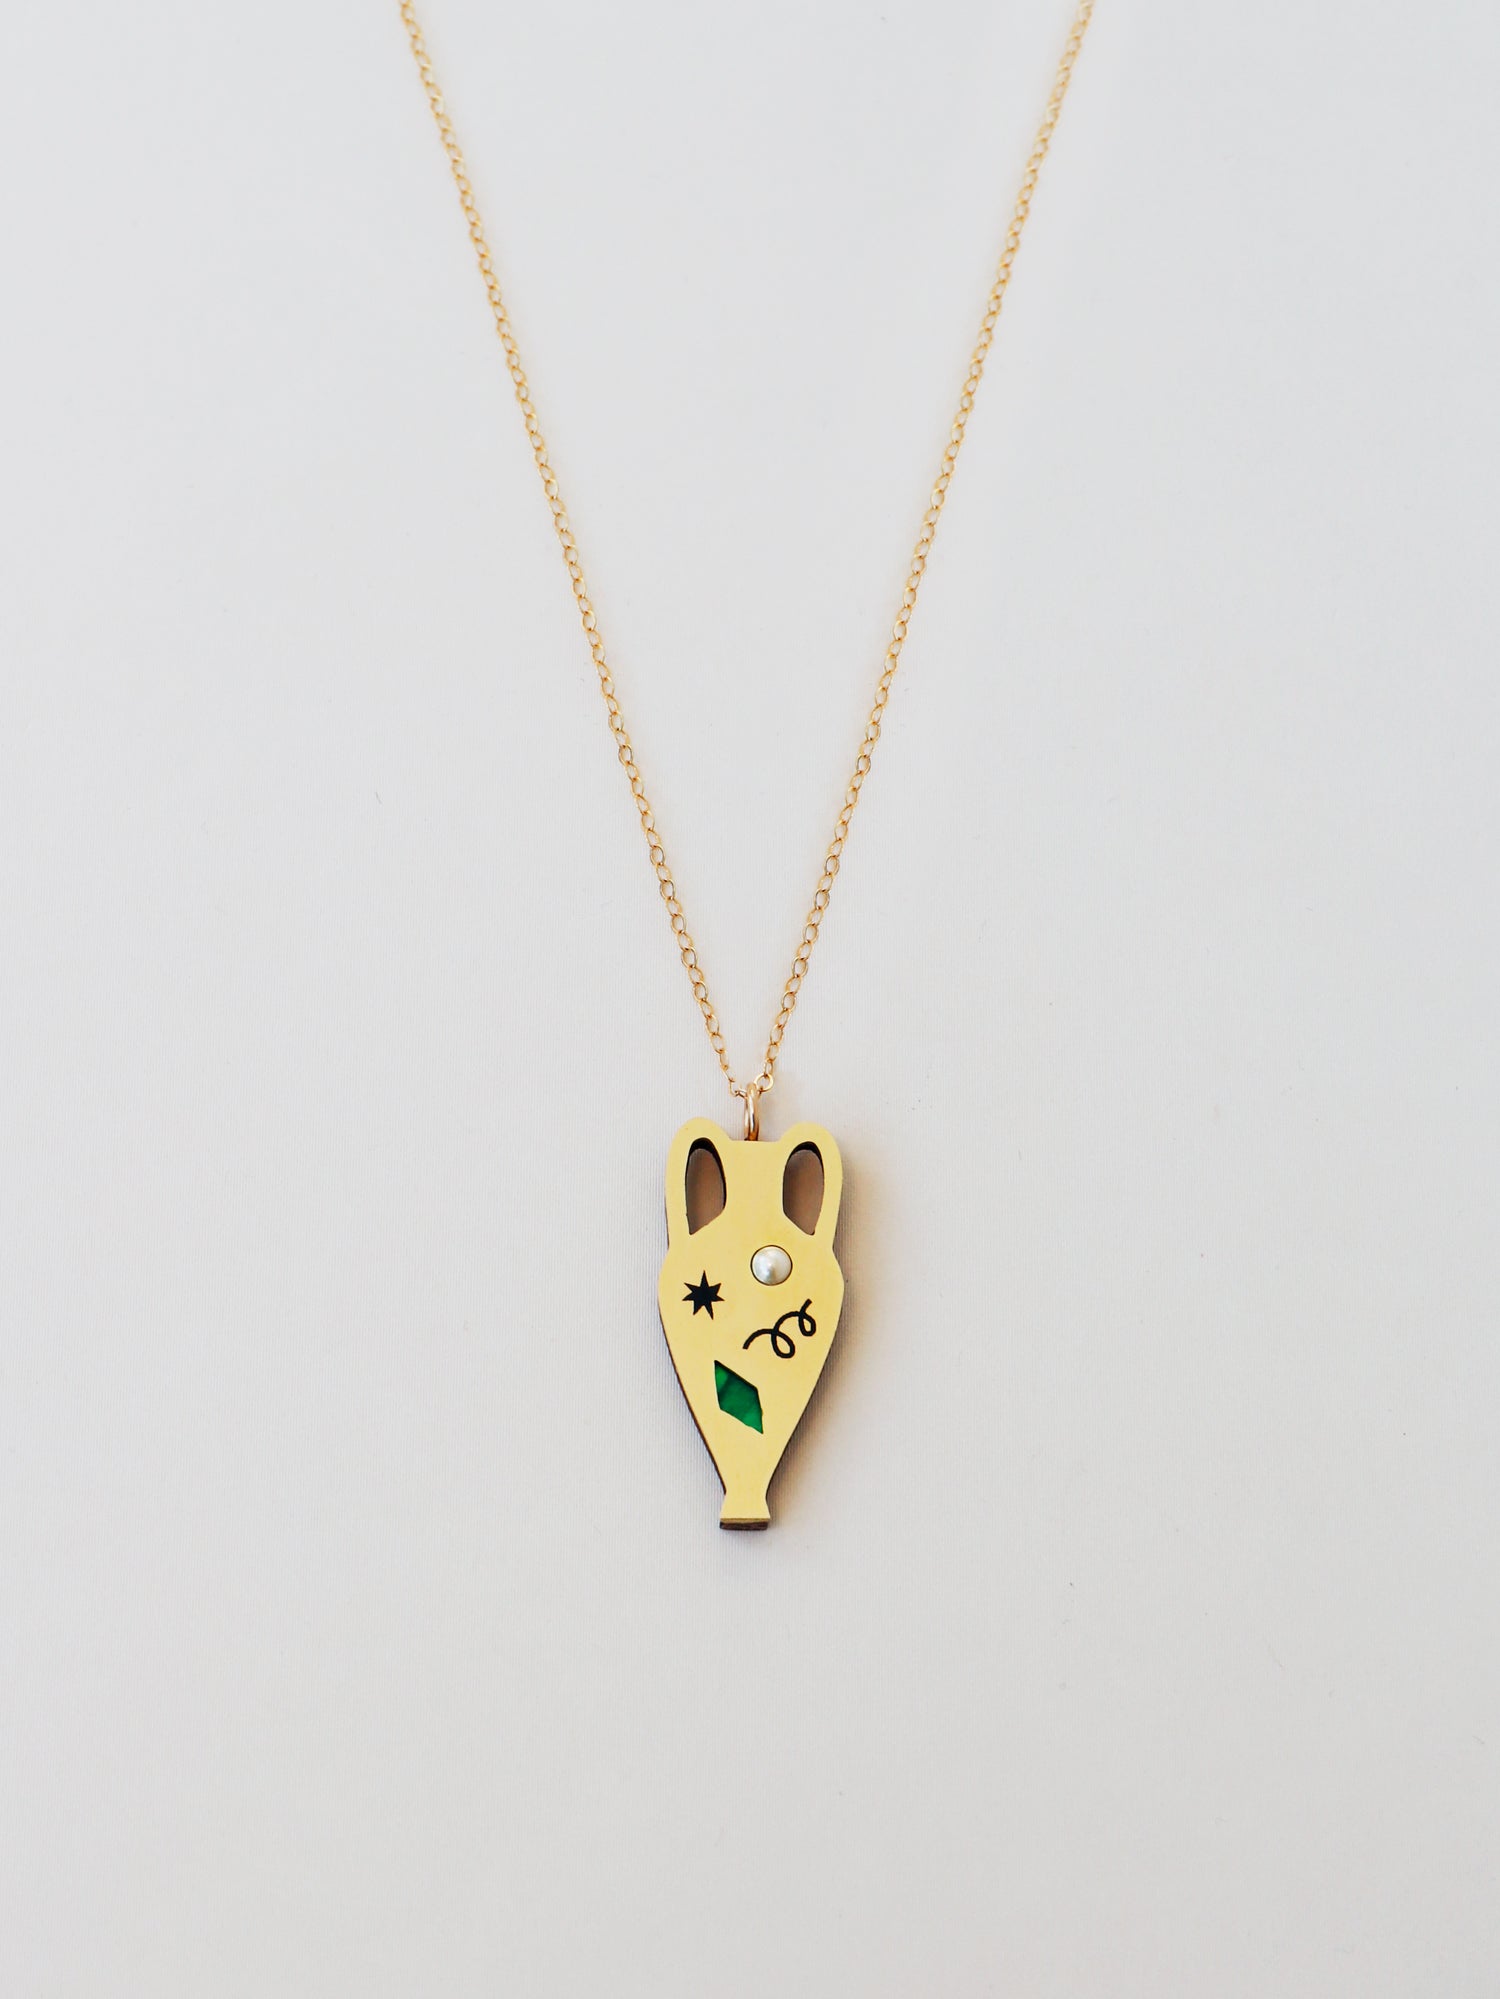 Brass vase shape pendant necklace. Glass pearls and abstract cut outs with inlaid shell and illustrative detailing. Handmade in the UK by Wolf & Moon.